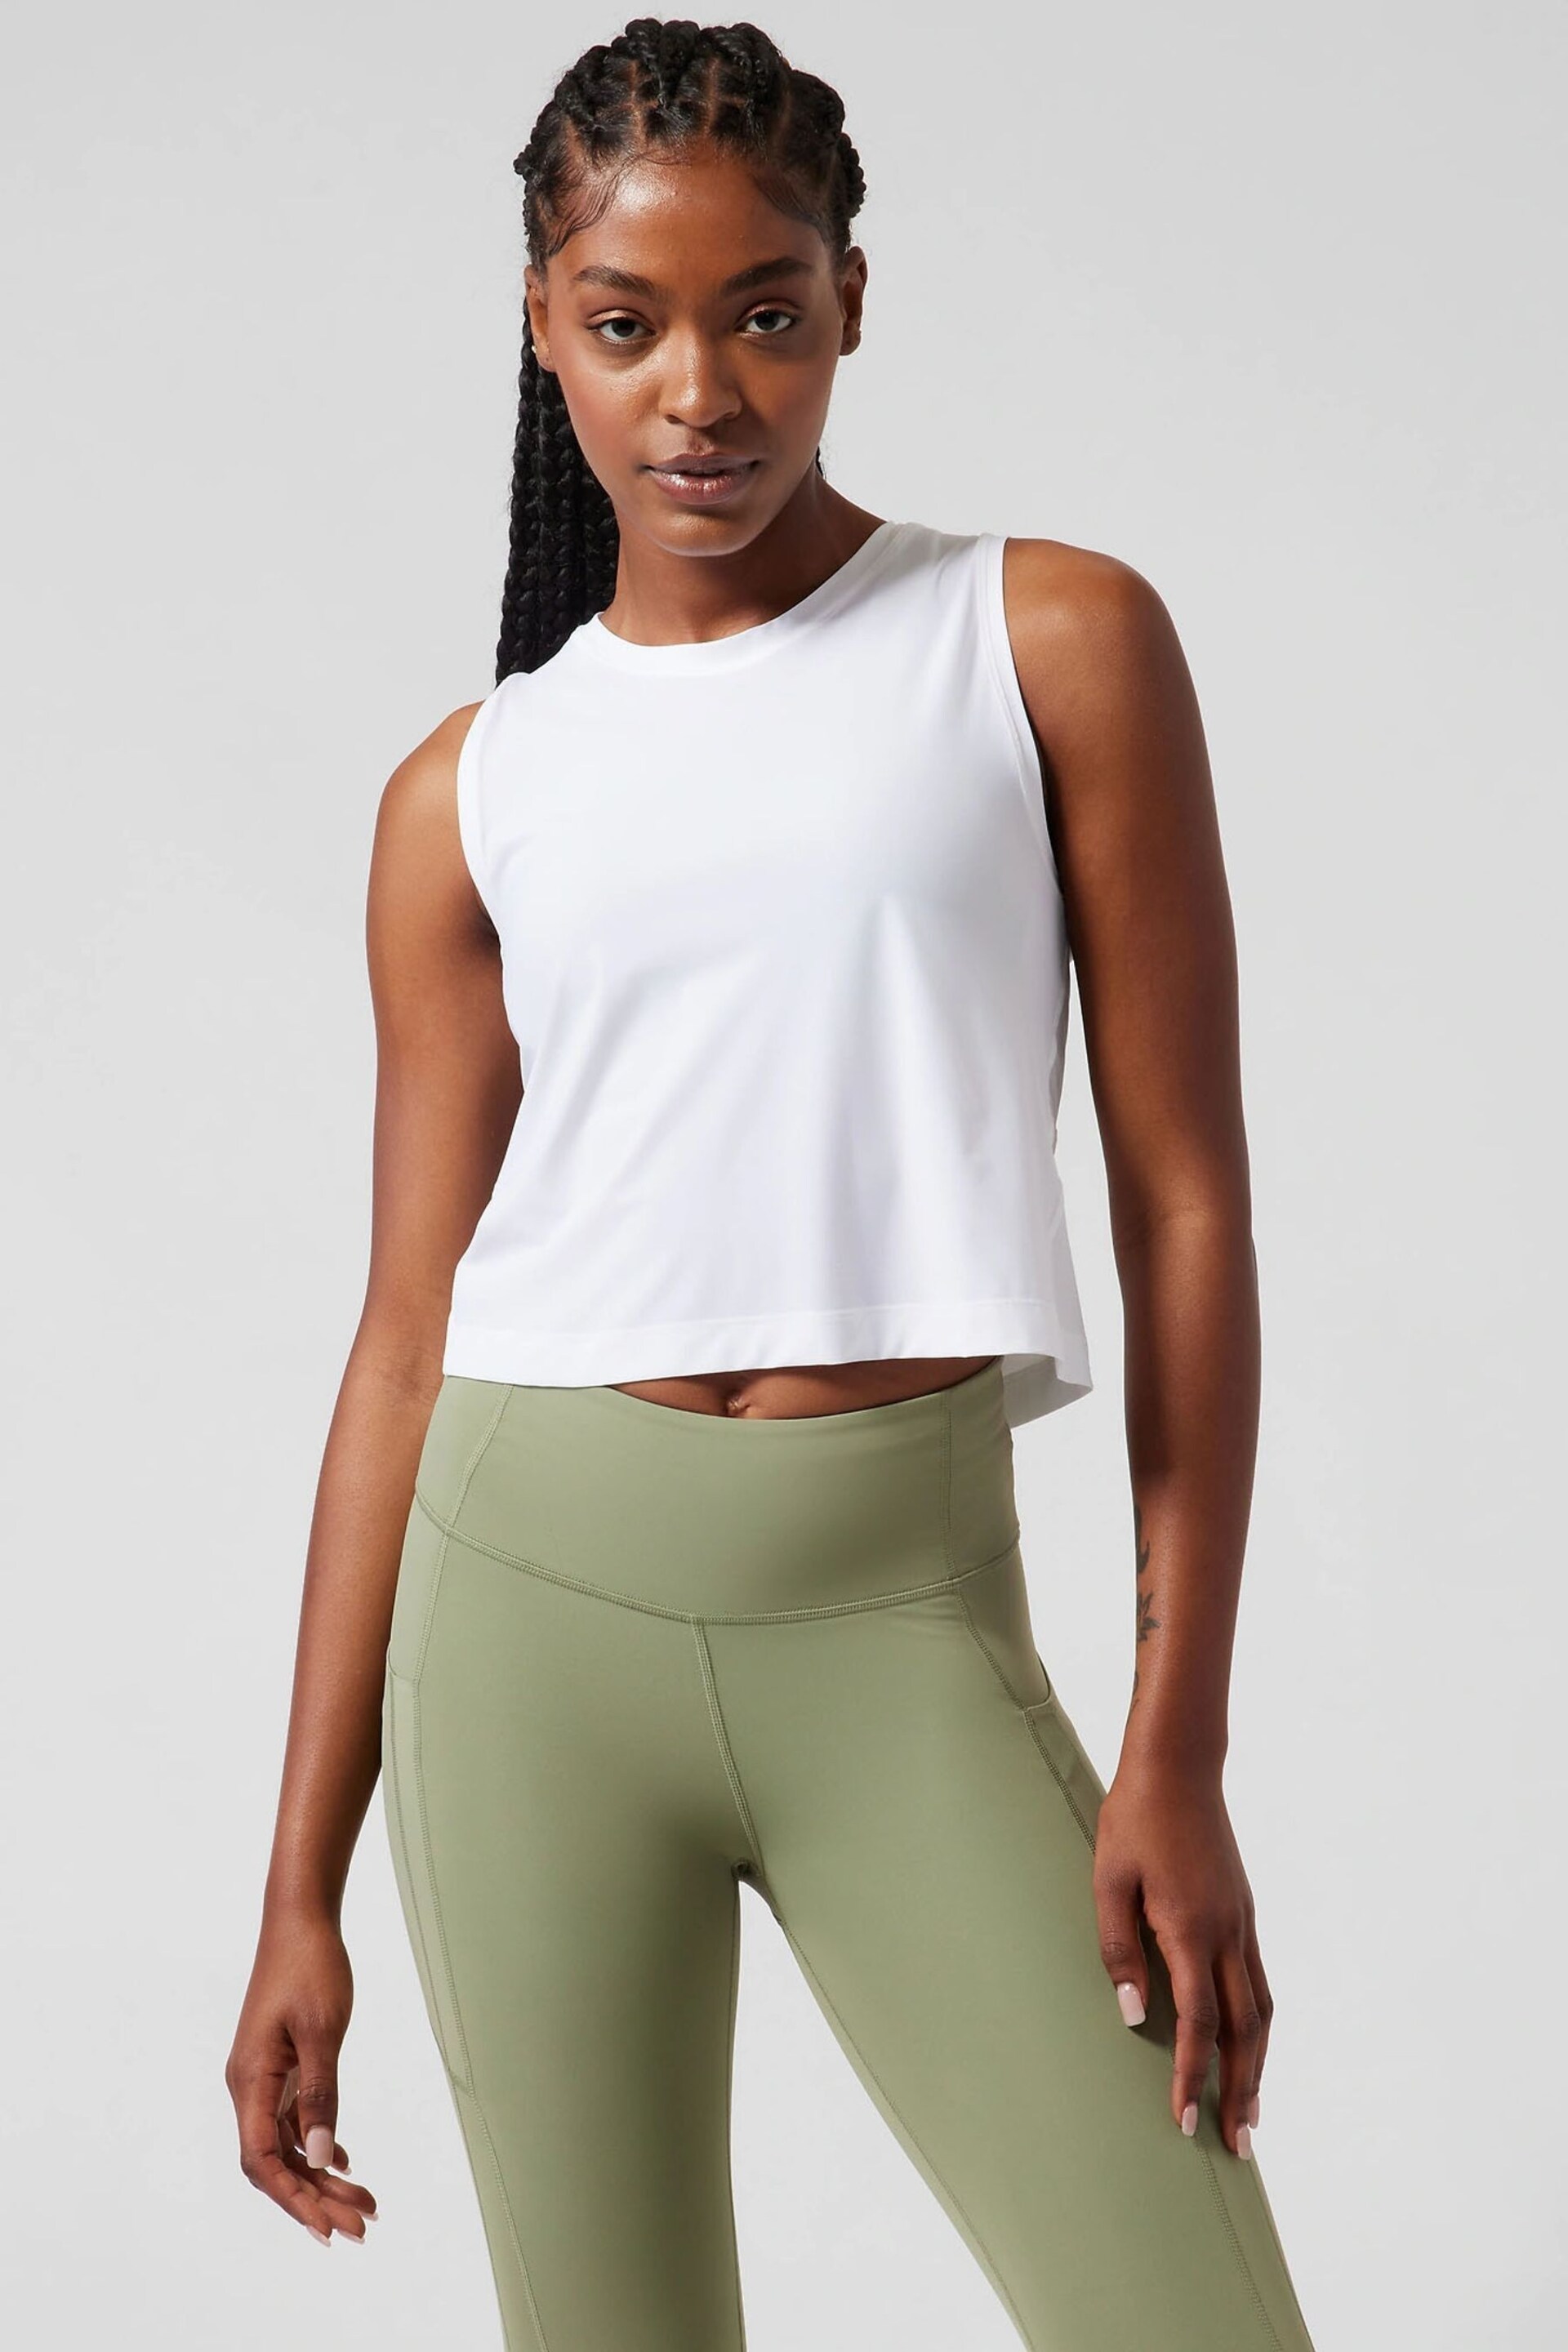 Athleta White Ultimate Muscle Tank Top - Image 1 of 8